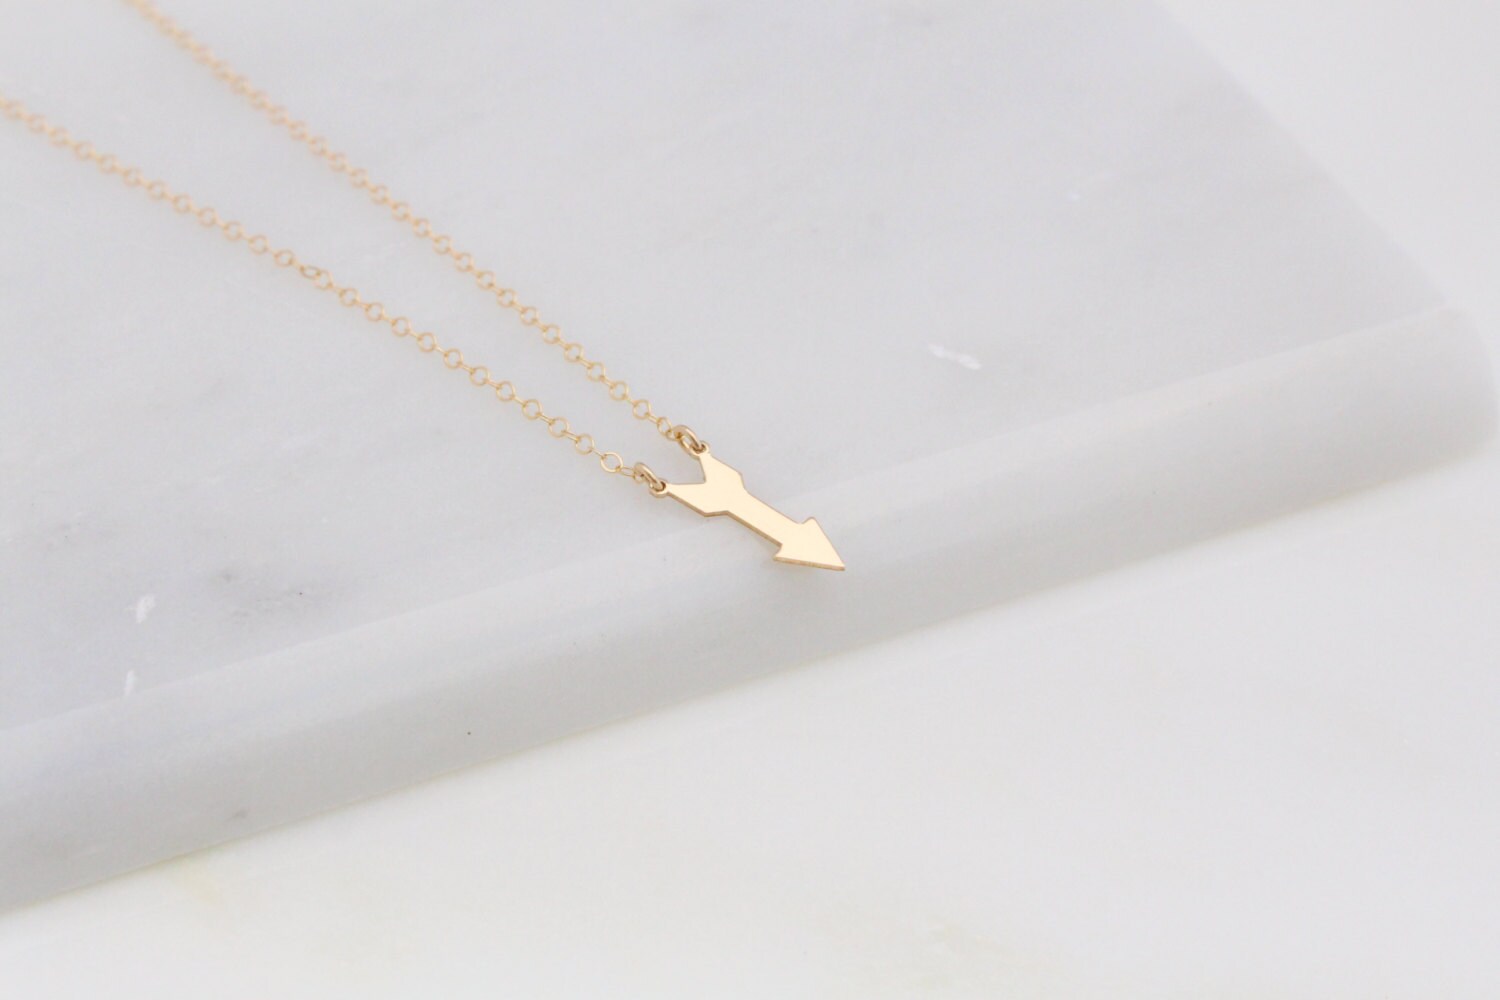 Tiny Arrow Necklace Gold Filled or Sterling Silver Charm | Etsy